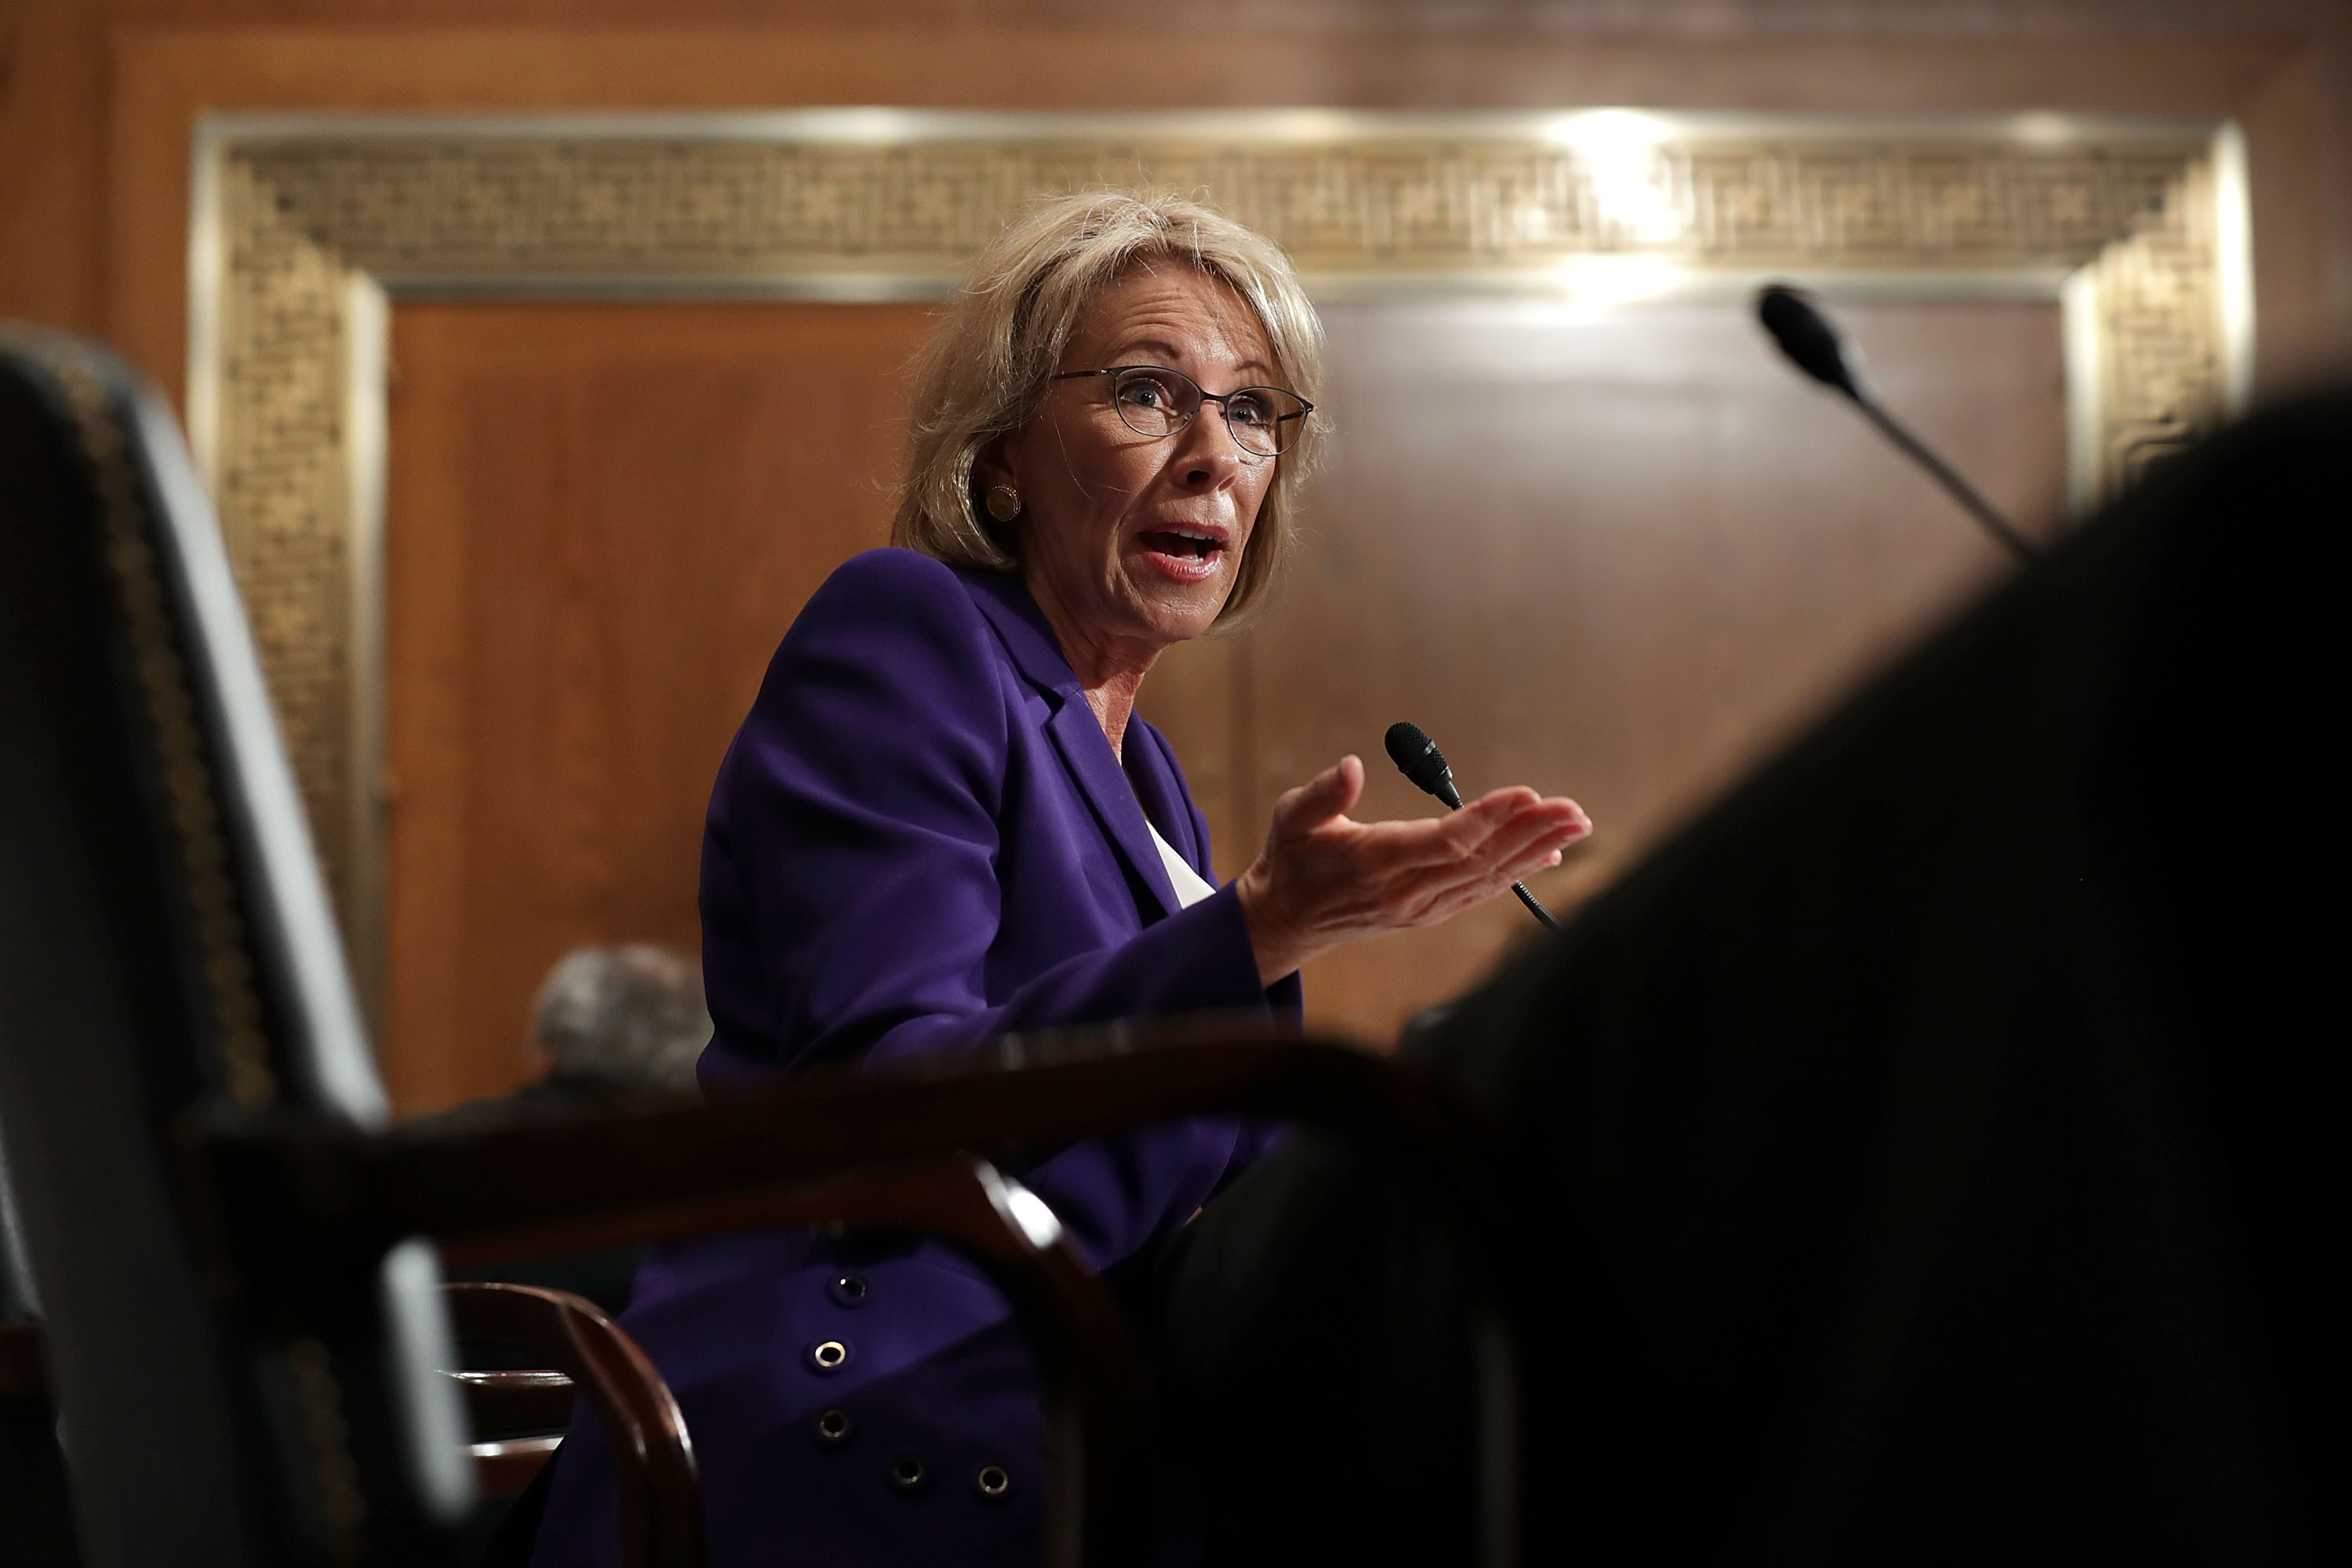 Betsy DeVos, President Donald Trump's pick to be the next Secretary of Education, testifies during her confirmation hearing before the Senate Health, Education, Labor and Pensions Committee on Jan. 17, 2017 in Washington, D.C. (Chip Somodevilla—Getty Images)